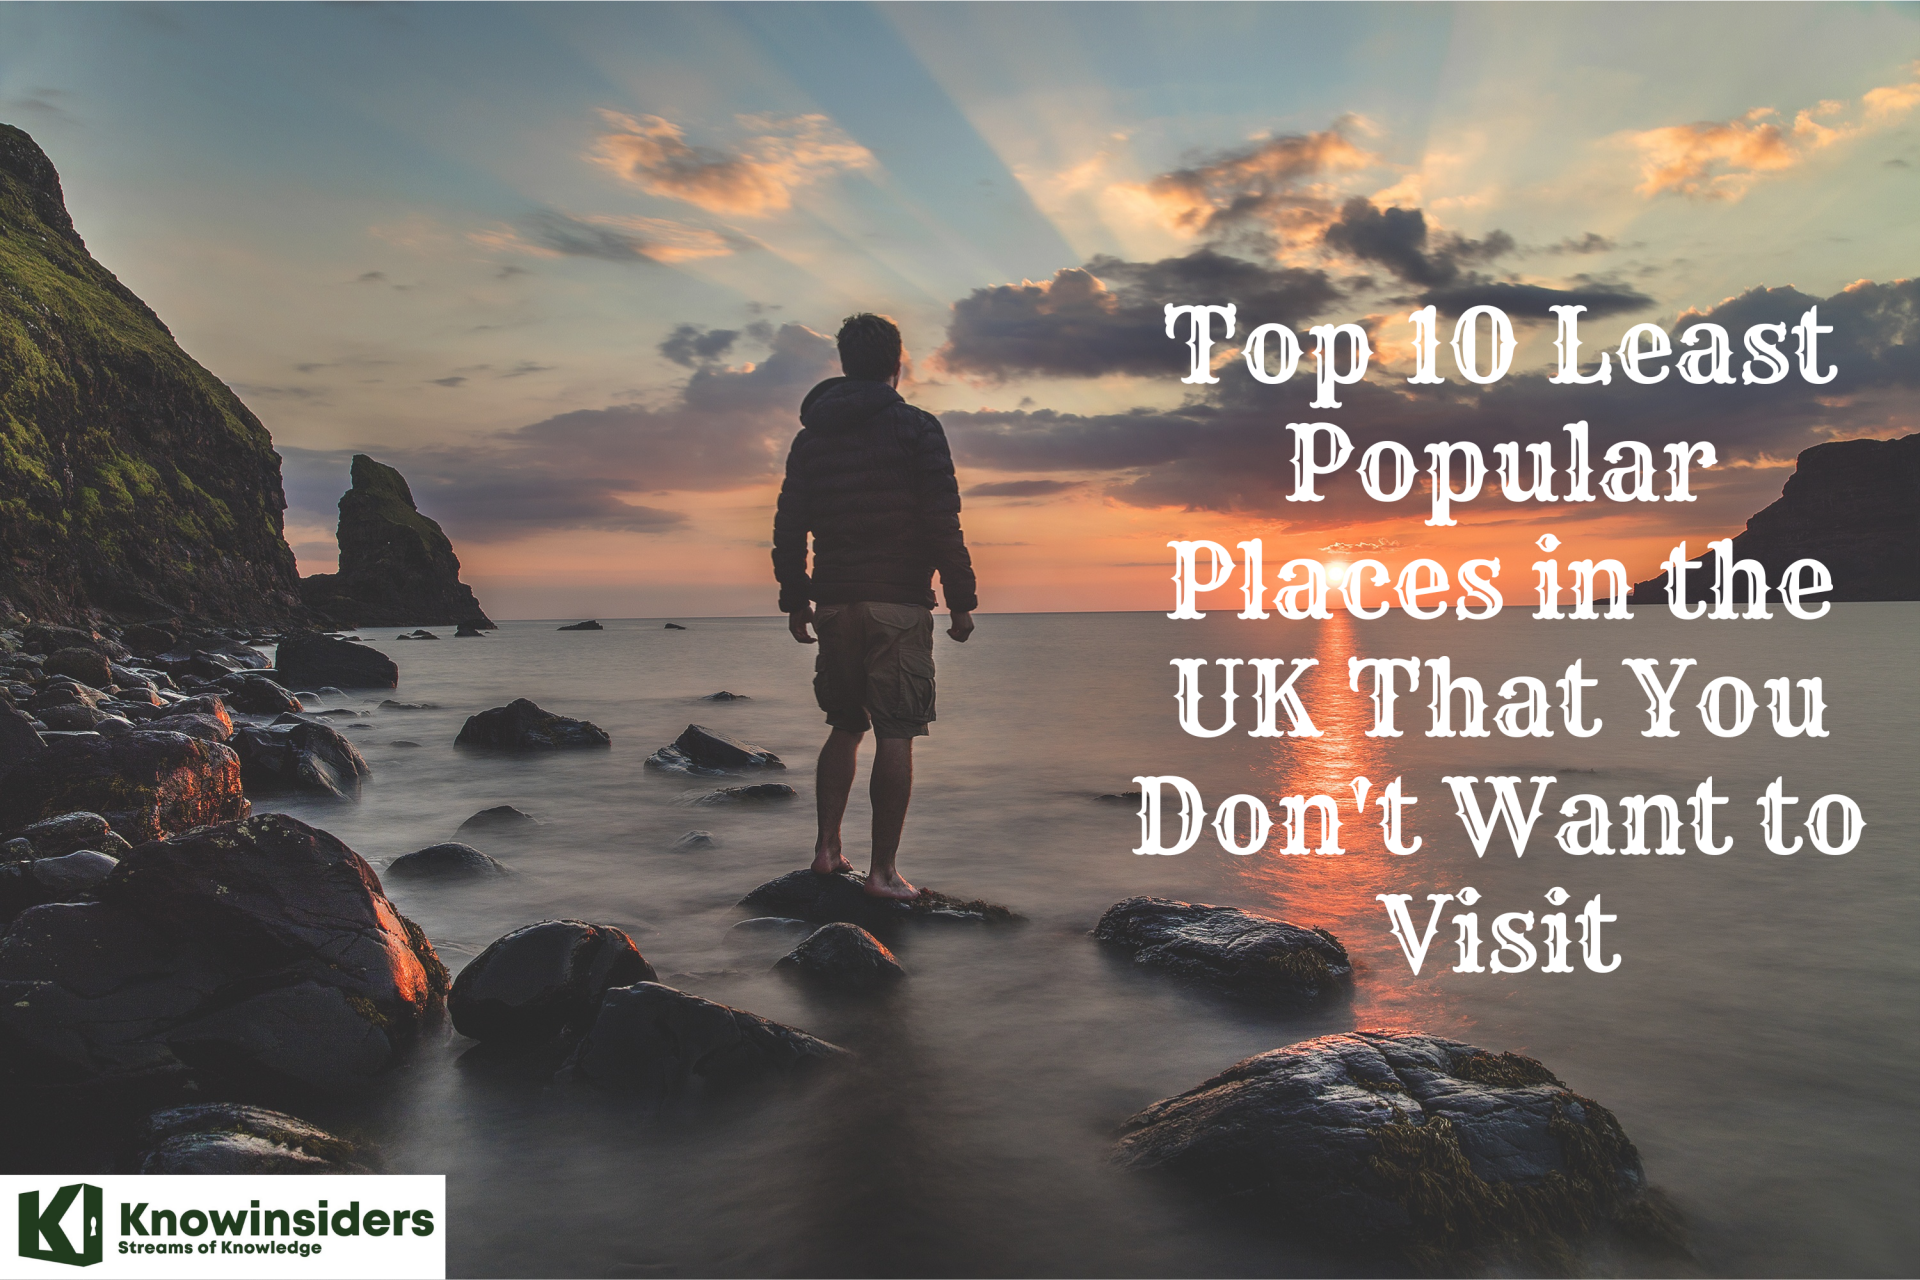 Top 10 Least Popular Places in the UK That You Don